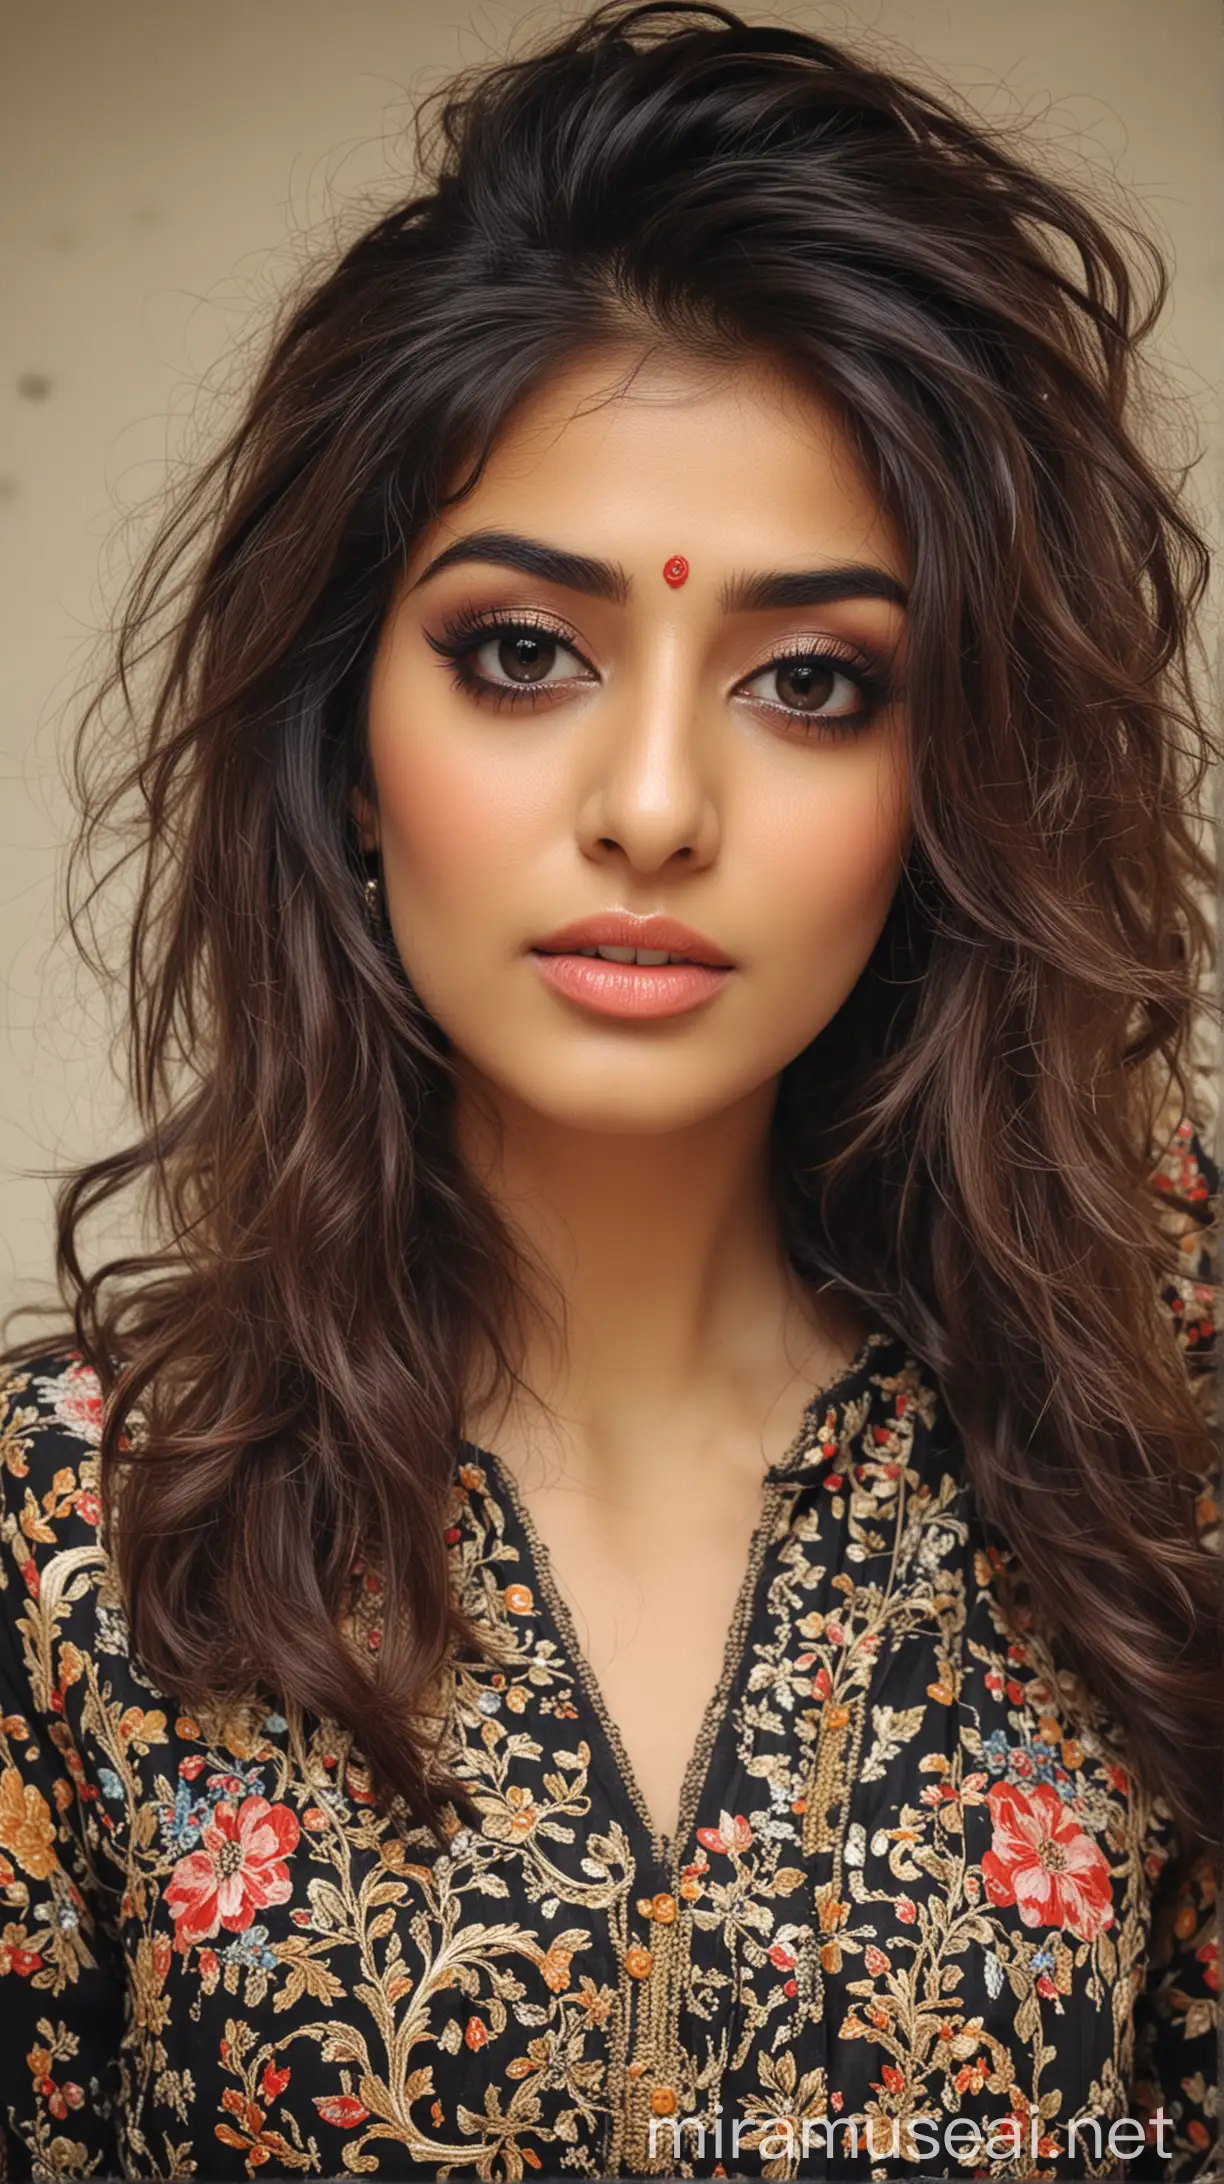 Extreme beautiful Pakistani women,,model,,cute,,Indian makeup,,messy hair attractive blouse 